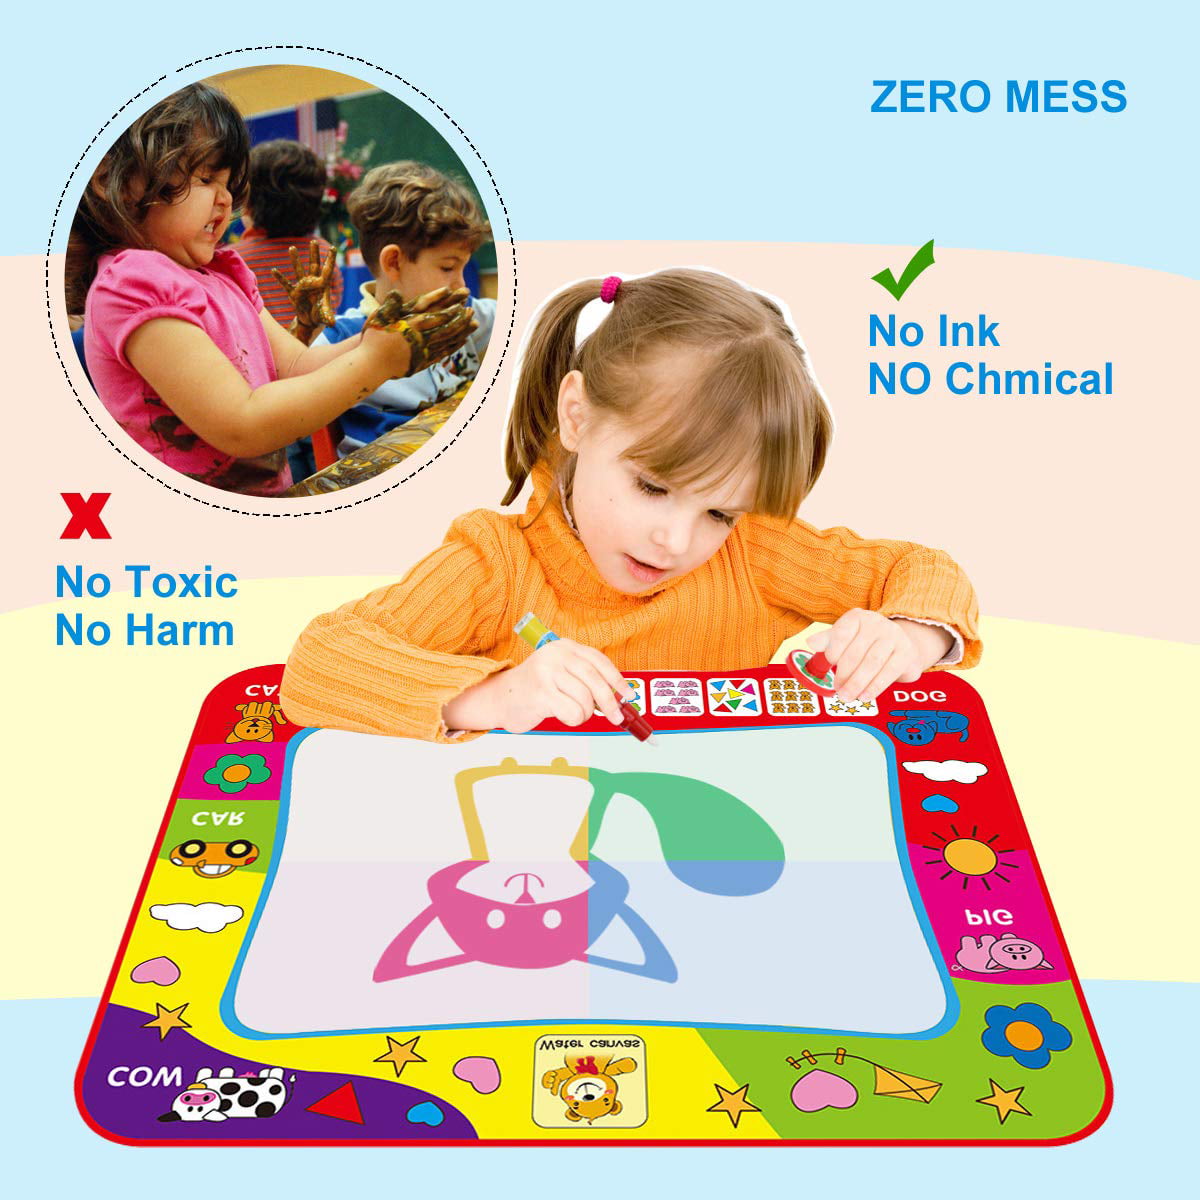 OTVIAP Water Drawing Mat Kids Painting Writing Mat, Large Developmental  Painting Doodle Board Toy With Magic Pen For Boys Girls 3-14 Years Old  Birthday Christmas Gift 